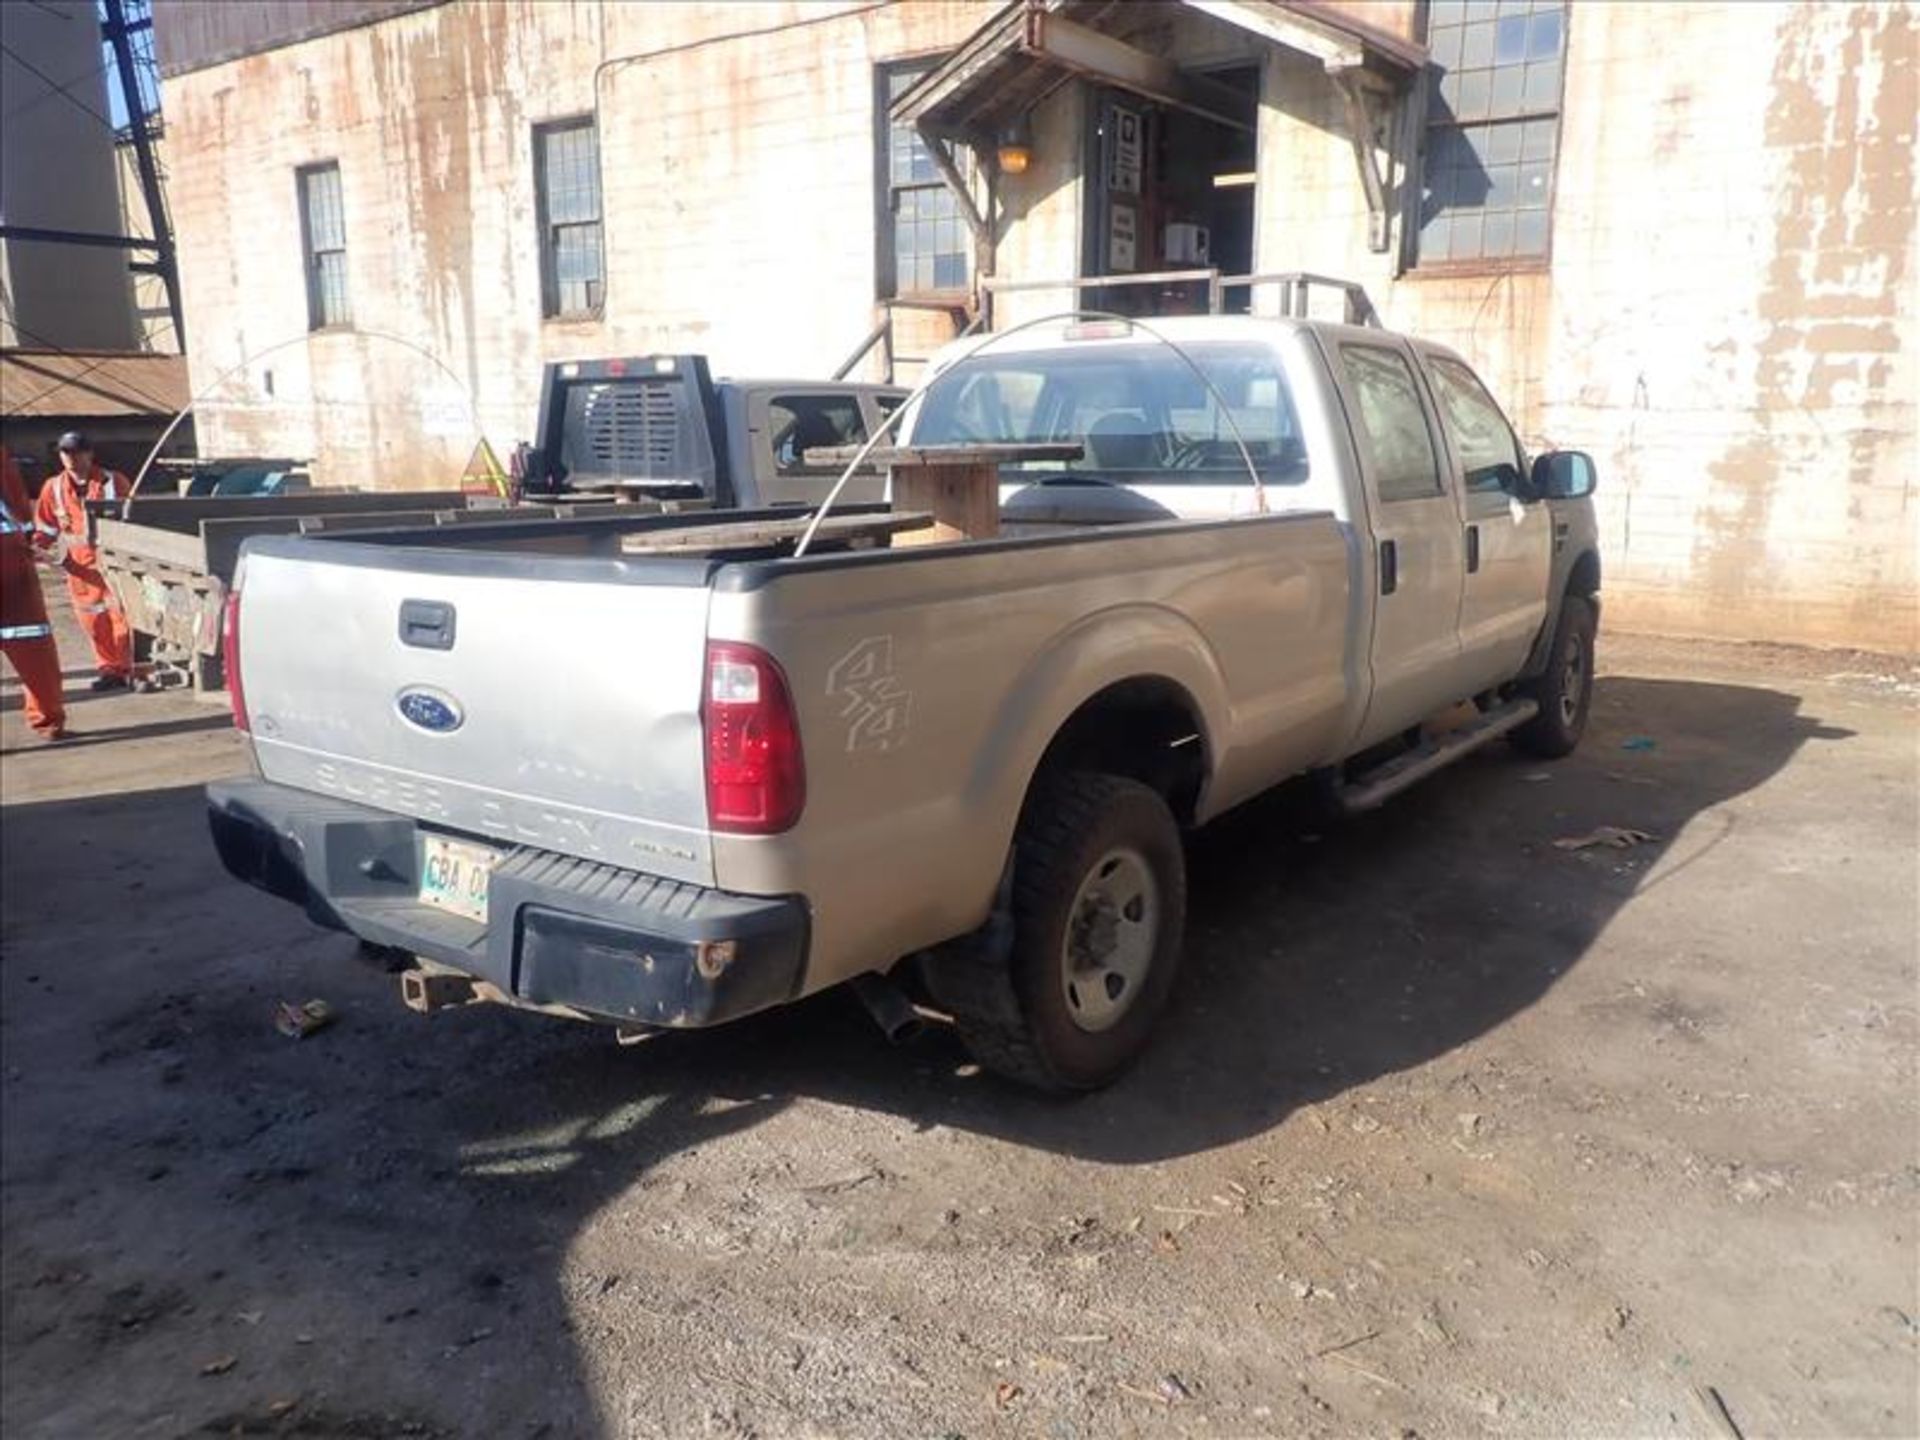 2008 Ford F250 XL SuperDuty pick-up truck, VIN 1FTSW21528EB74521, approx. 103000 km, crew-cab, - Image 3 of 9